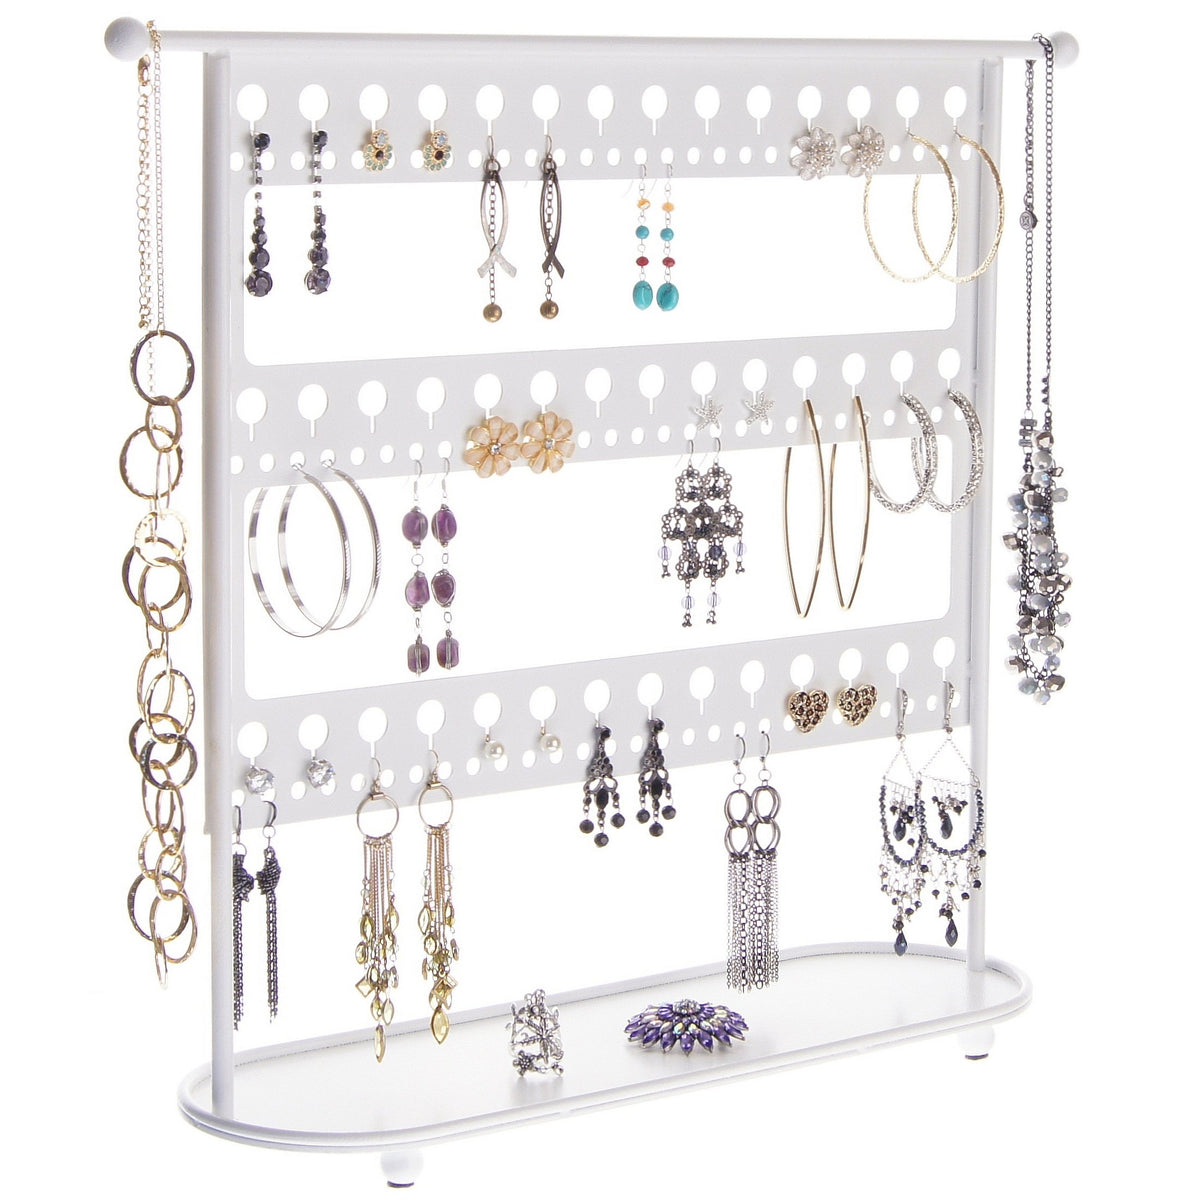 Angelynn's Large Long Hoop Dangle Earring Holder Organizer Wall Mount Jewelry Display, Rose White